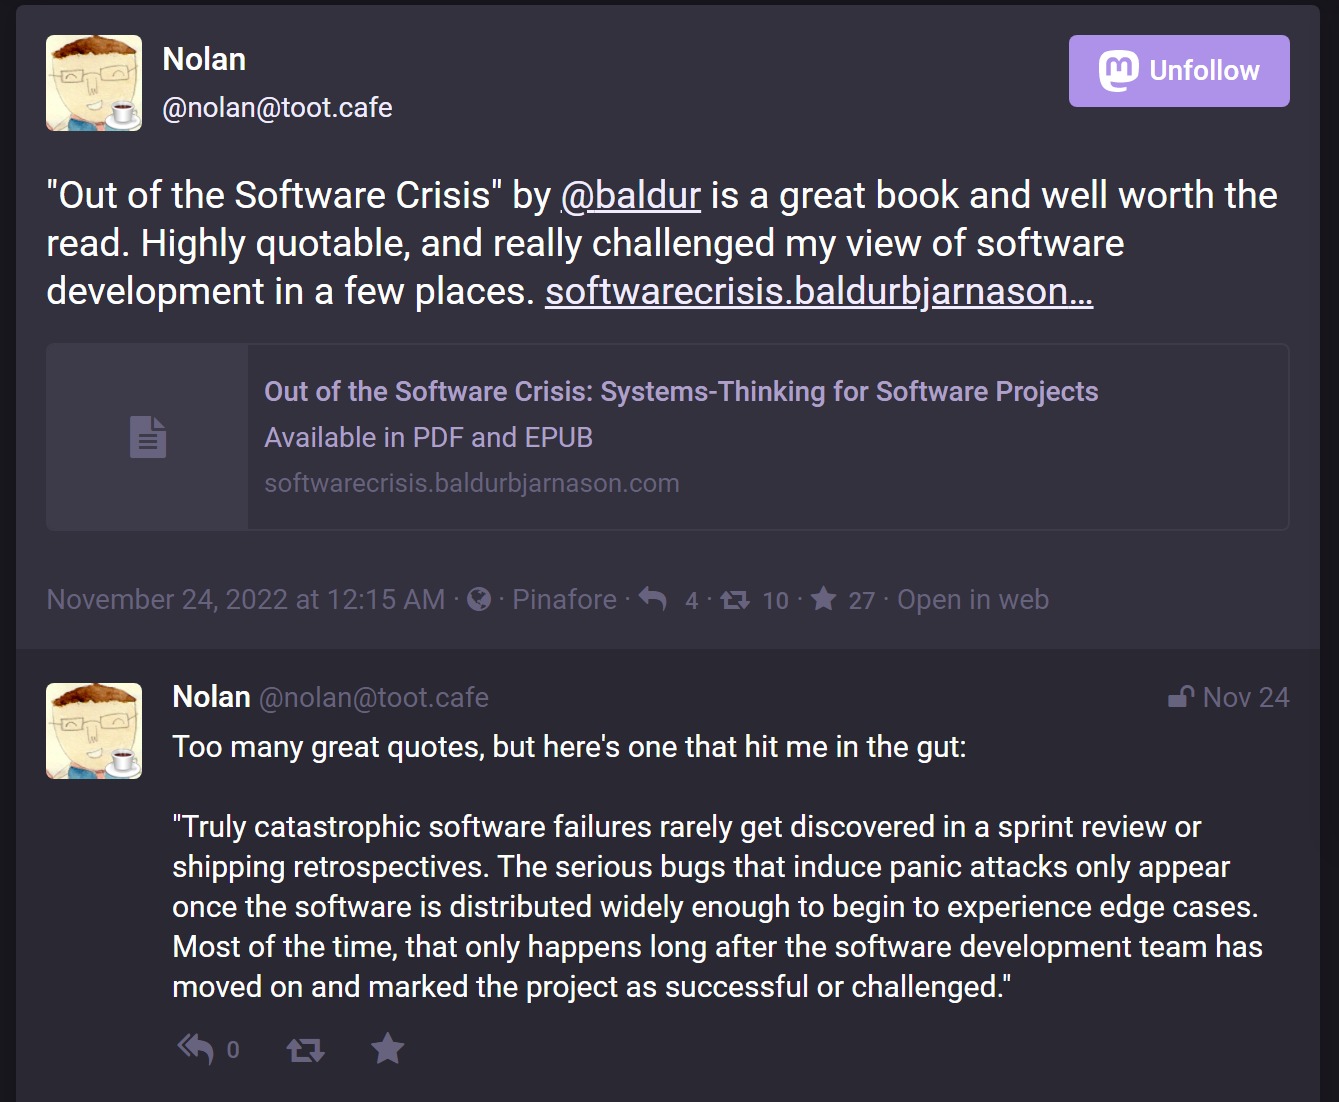 Nolan Lawson saying 'Out of the Software Crisis by @baldur is a great book and well worth the read. Highly quotable, and really challenged my view of software development in a few places. Too many great quotes, but here's one that hit me in the gut: 'Truly catastrophic software failures rarely get discovered in a sprint review or shipping retrospectives. The serious bugs that induce panic attacks only appear once the software is distributed widely enough to begin to experience edge cases. Most of the time, that only happens long after the software development team has moved on and marked the project as successful or challenged.'